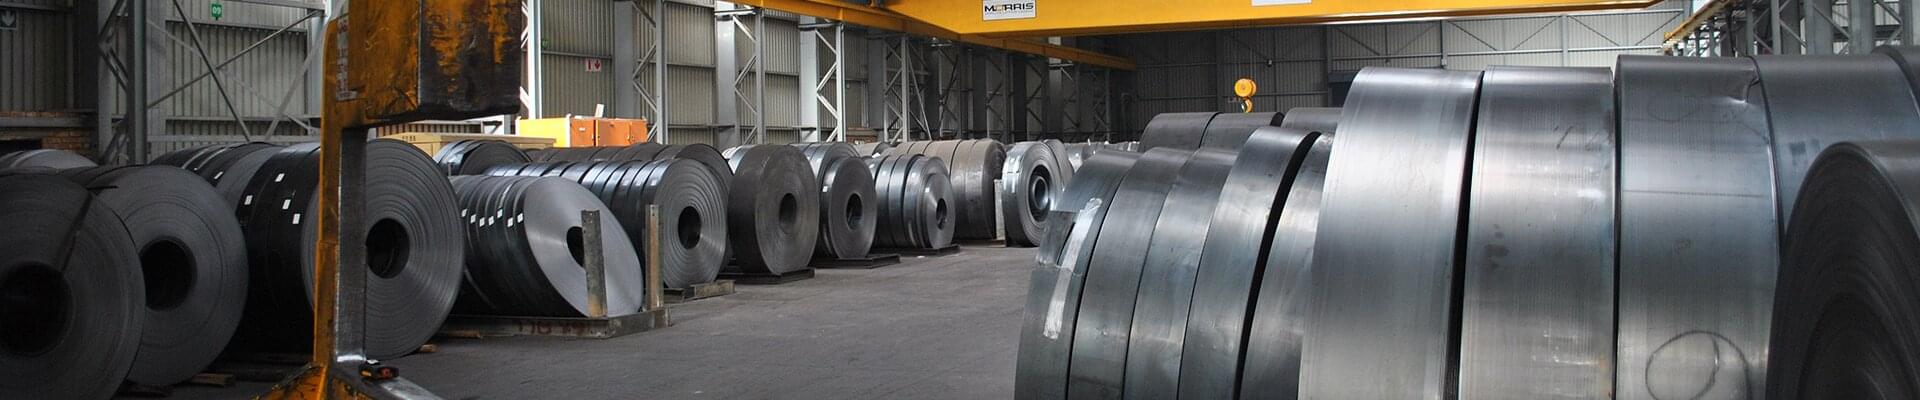 ABUS cranes in the steel pipe company Africa Steel and Tube